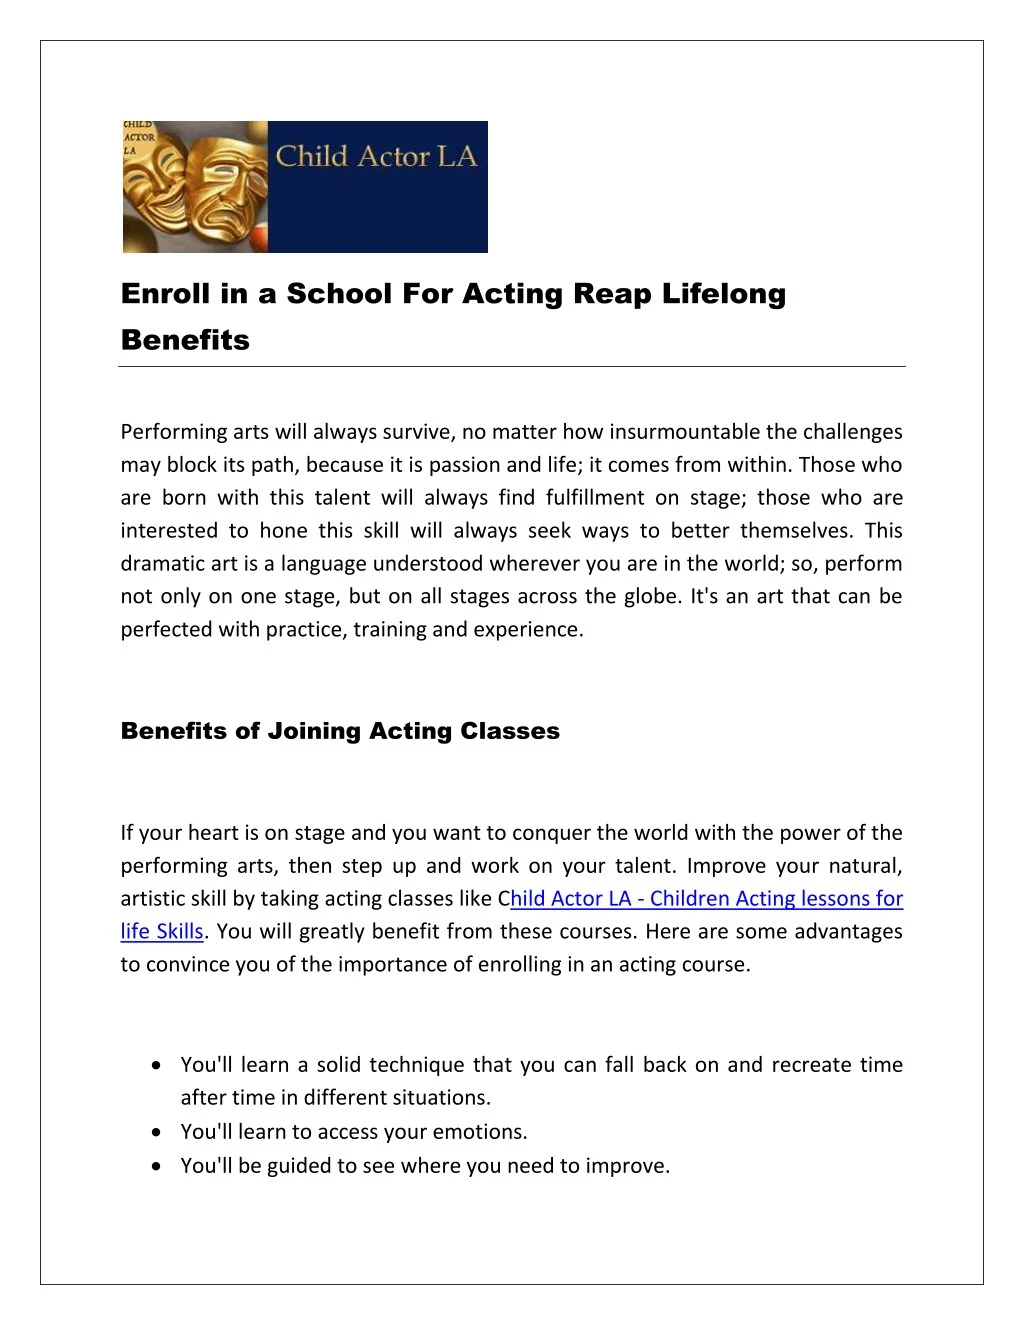 enroll in a school for acting reap lifelong